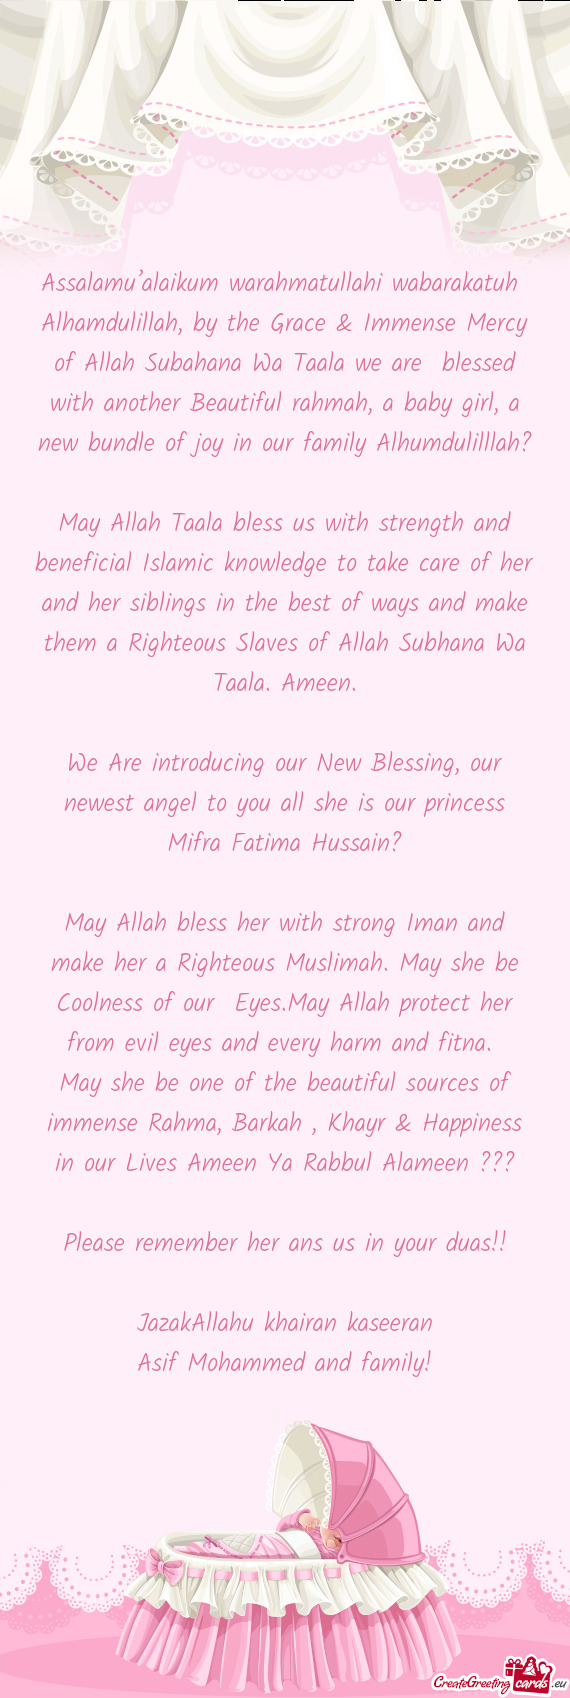 May Allah bless her with strong Iman and make her a Righteous Muslimah. May she be Coolness of our